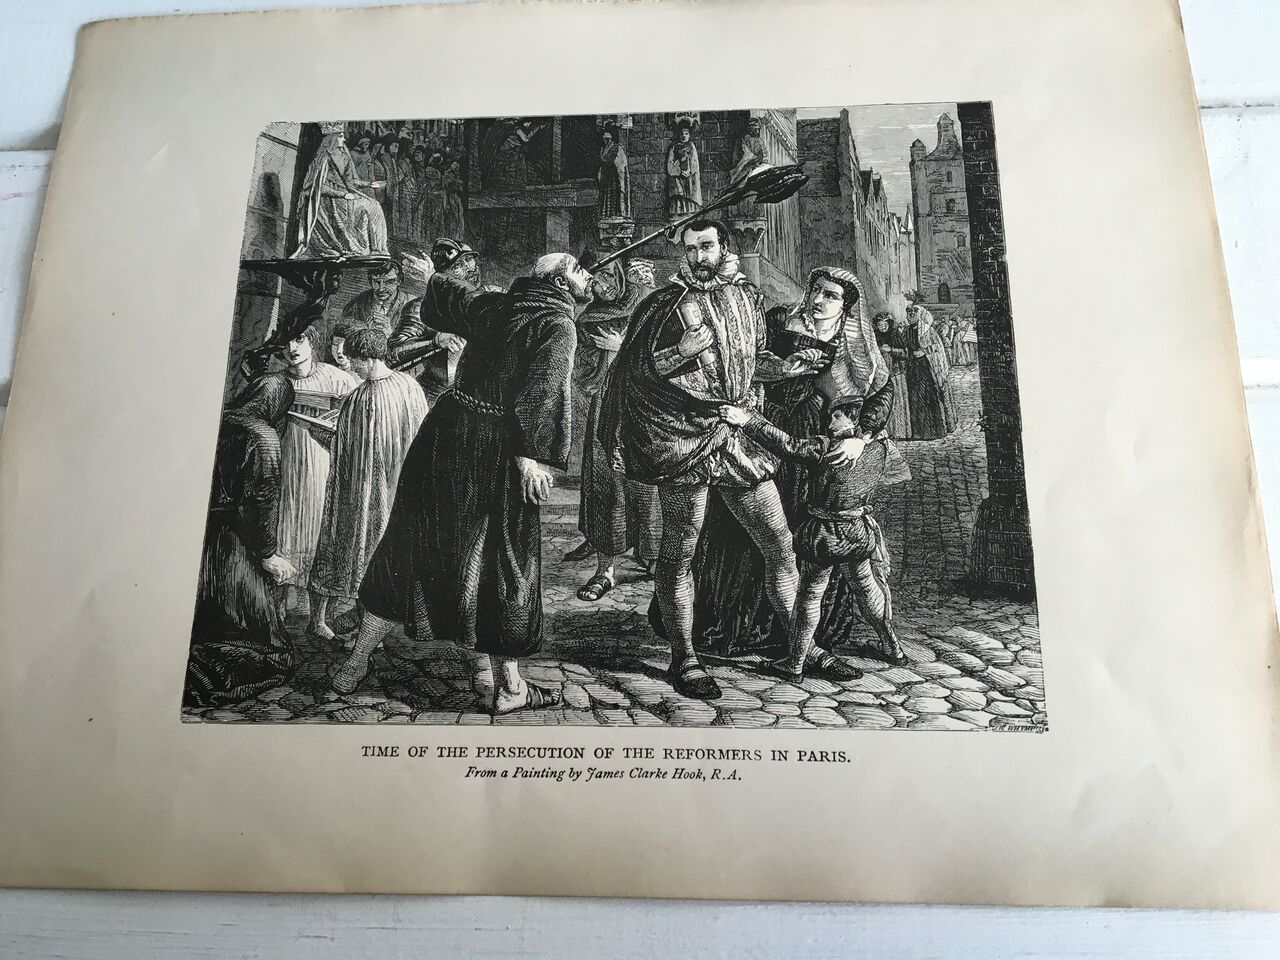 AN ENGRAVING c1900 OF A PAINTING BY JAMES CLARKE HOOK (1819 - 1907 ). "TIME OF THE PERSECUTION OF